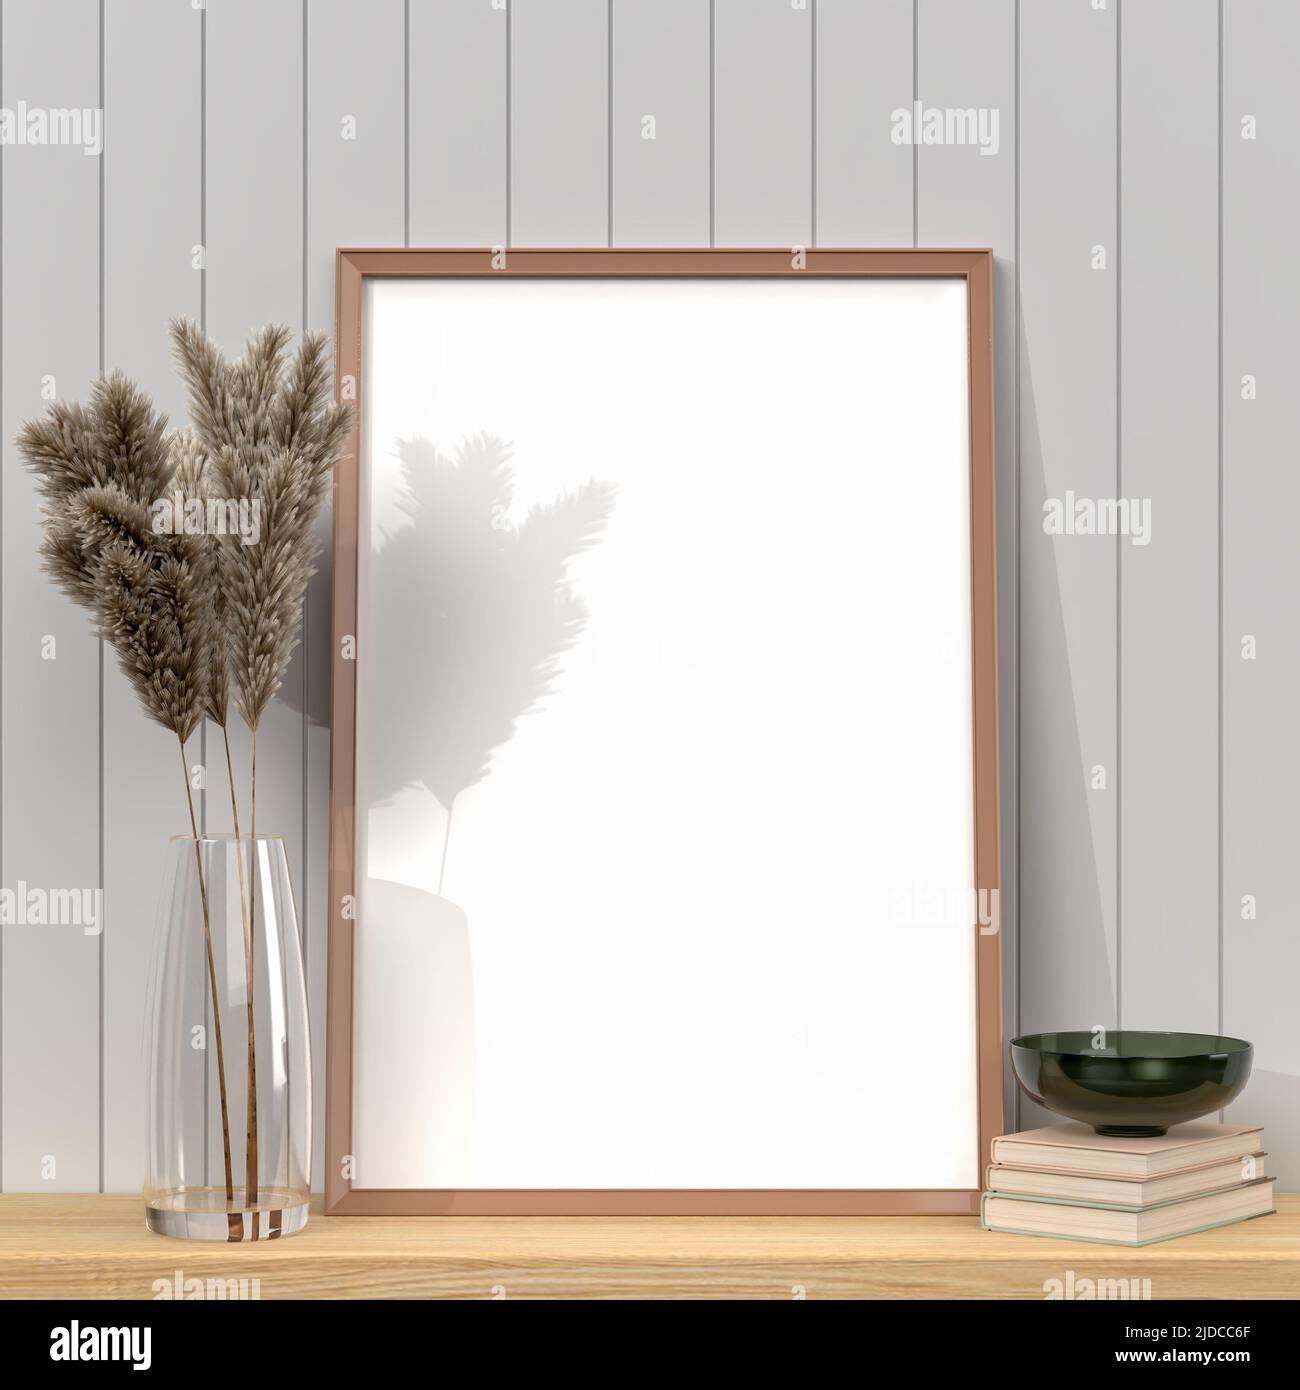 empty mockup photo frame on wall in room interior close up . Modern and floral concept of shelves. with shadows windows Stock Photo